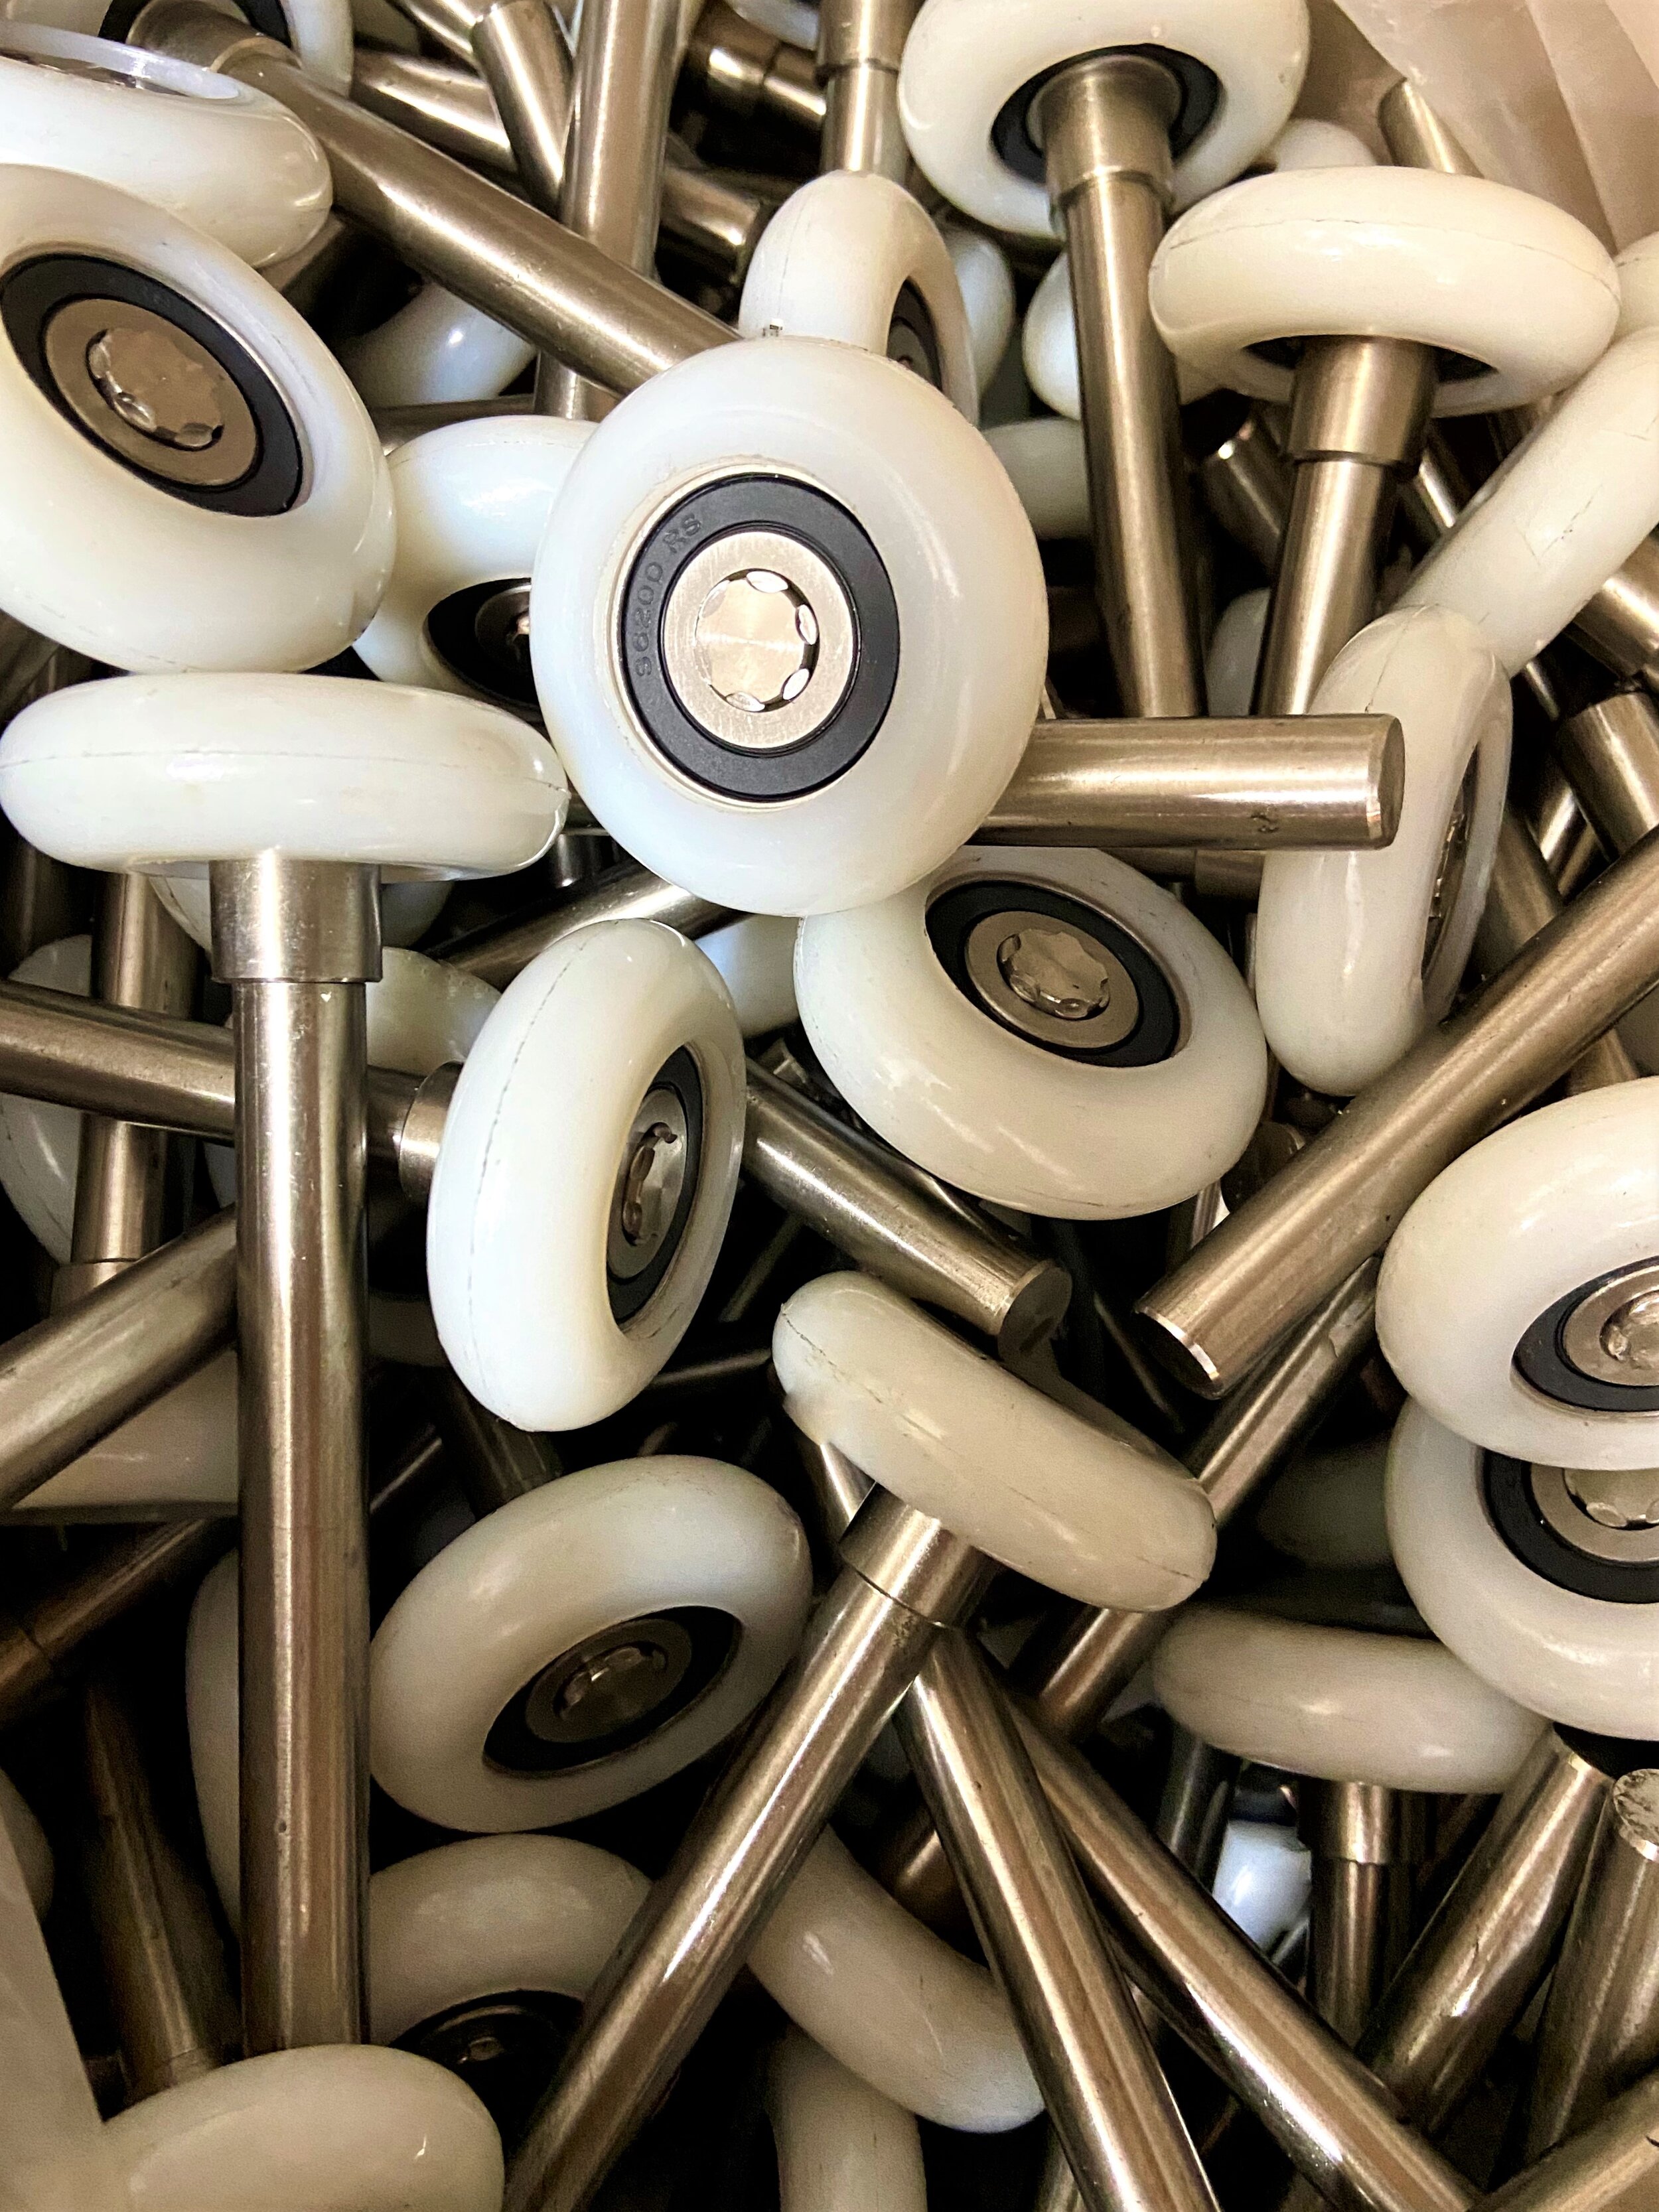 Oct 2019 - Sealed bearing SS rollers.